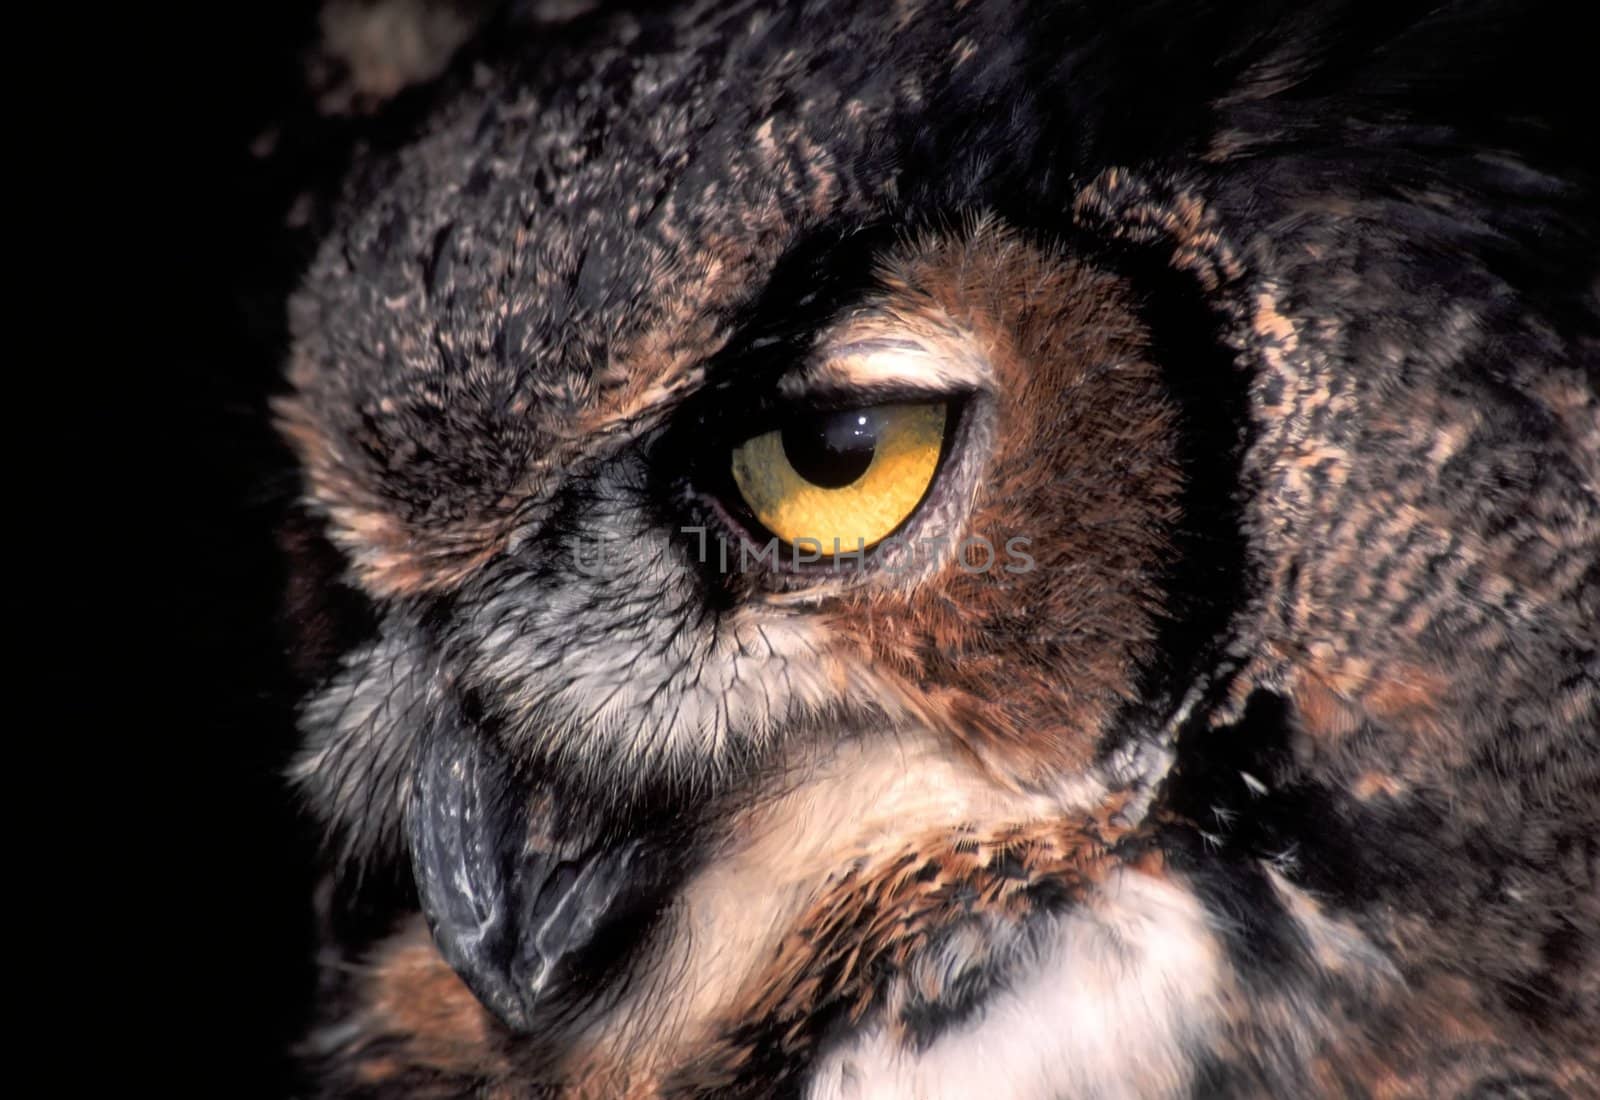 Gaze of the Great Horned Owl by Wirepec